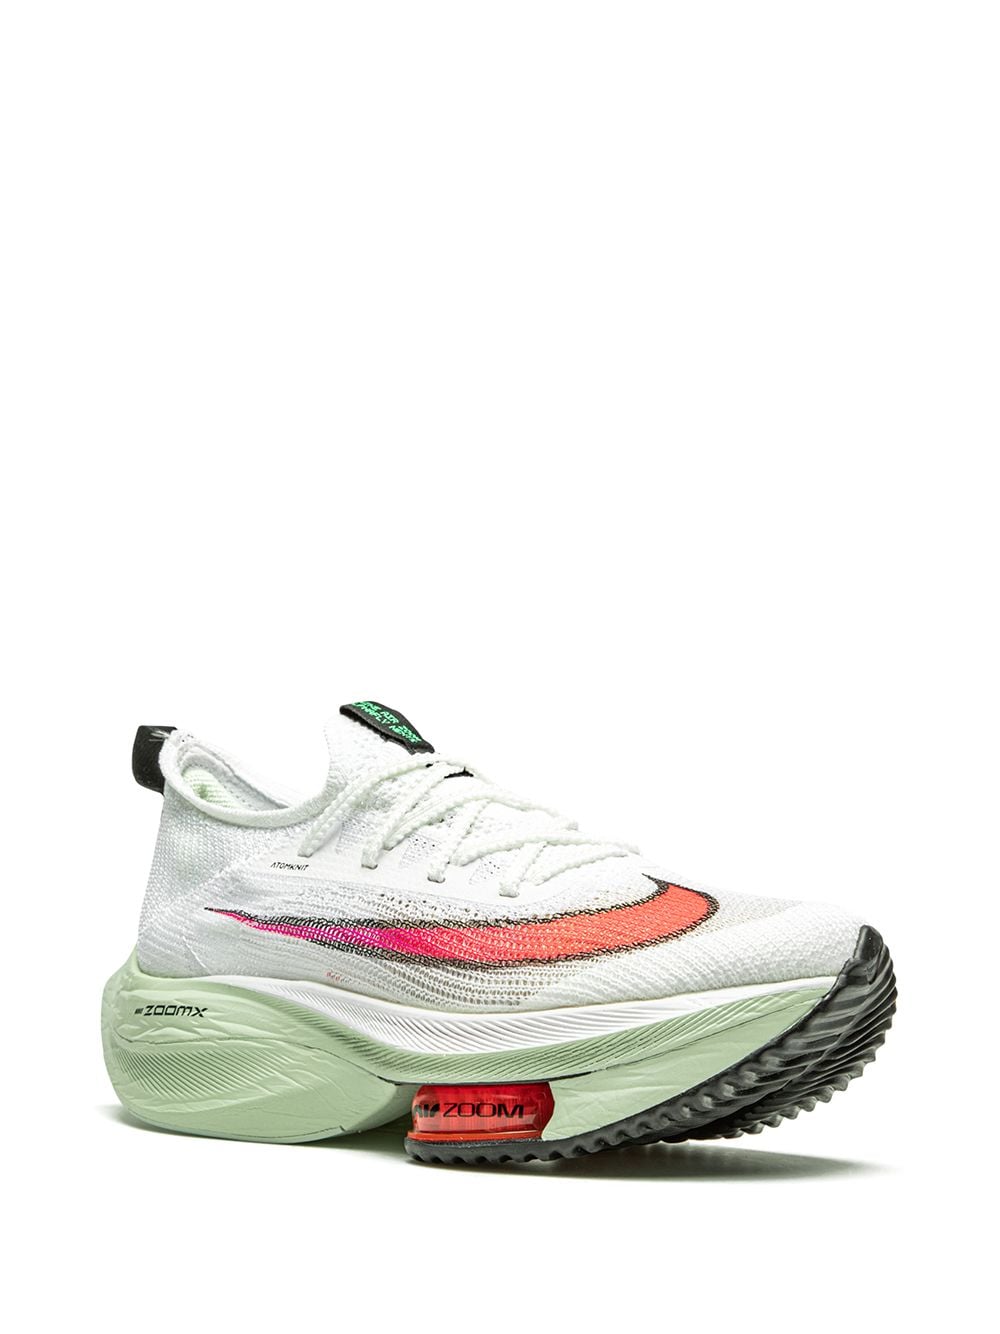 Image 2 of Nike Air Zoom Alphafly Next% "Watermelon" sneakers